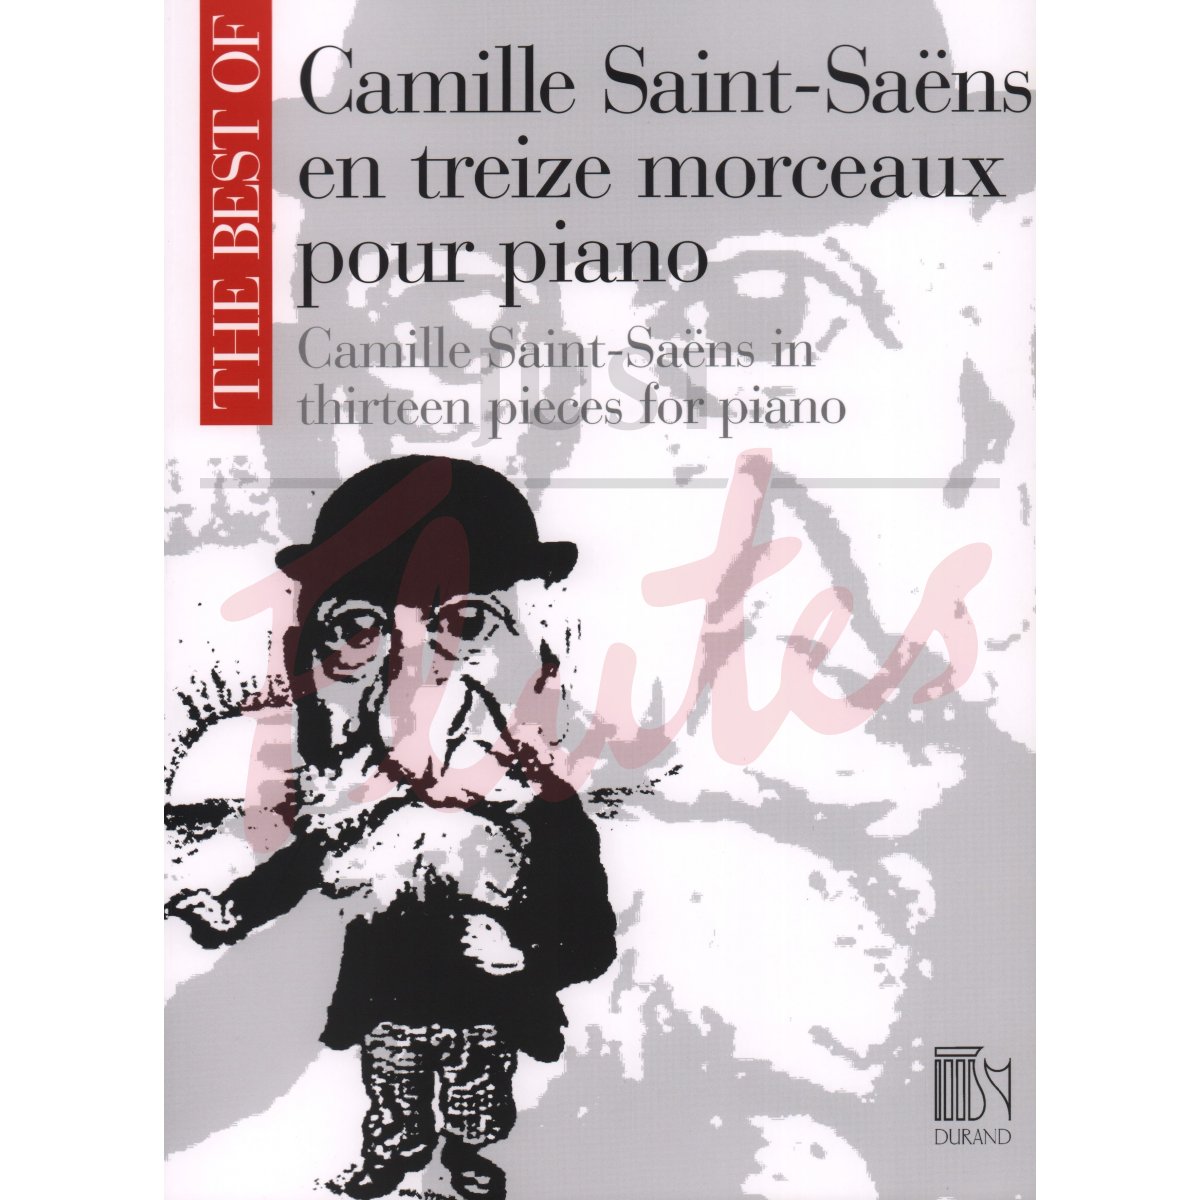 The Best of Camille Saint-Saens in Thirteen Pieces for Piano